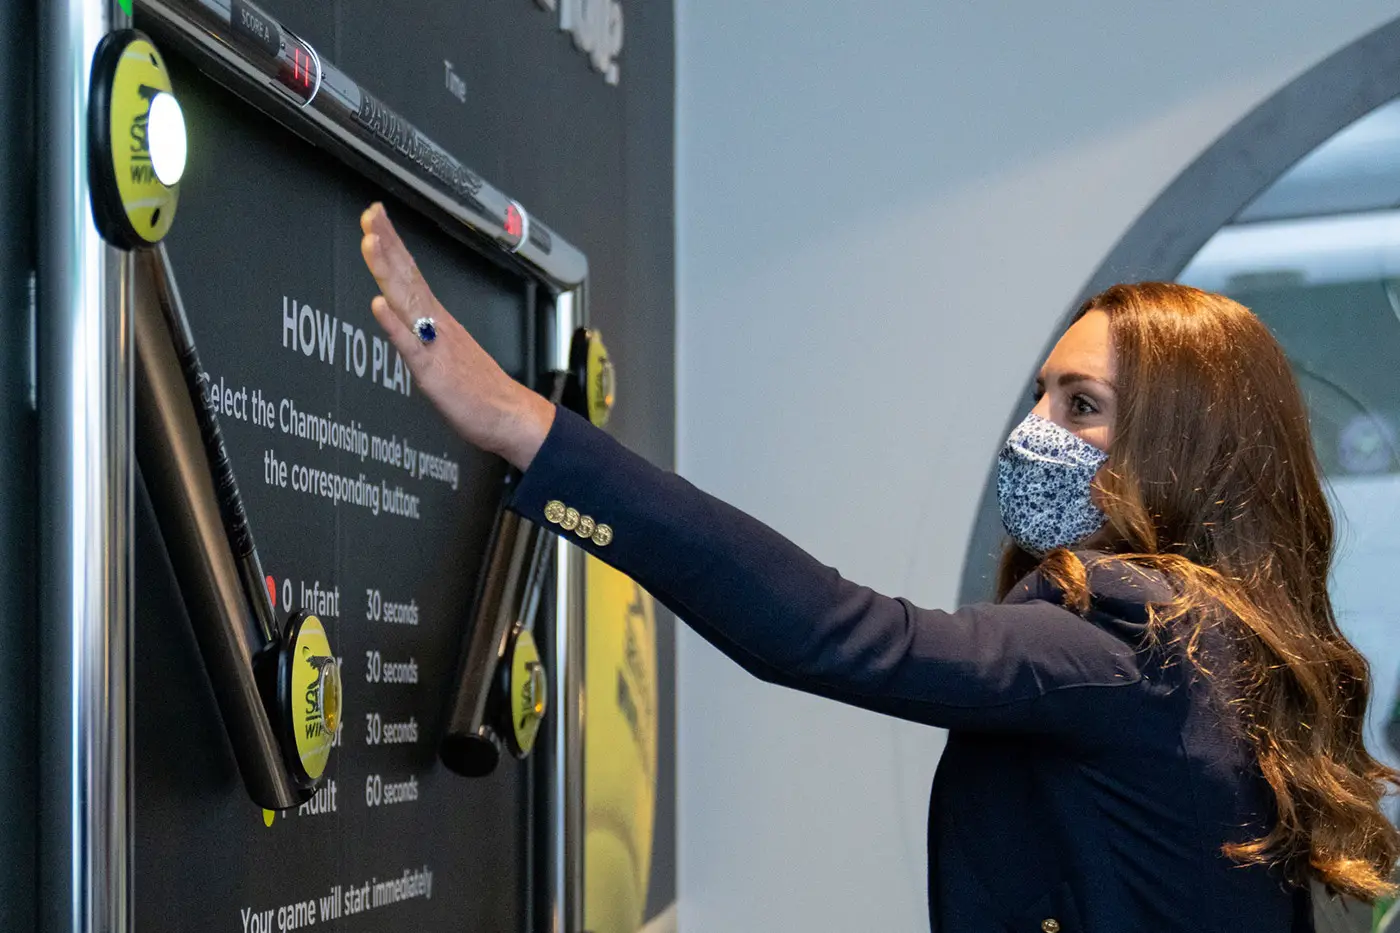 The Duchess of Cambridge tried her hand at the 'reaction station'.